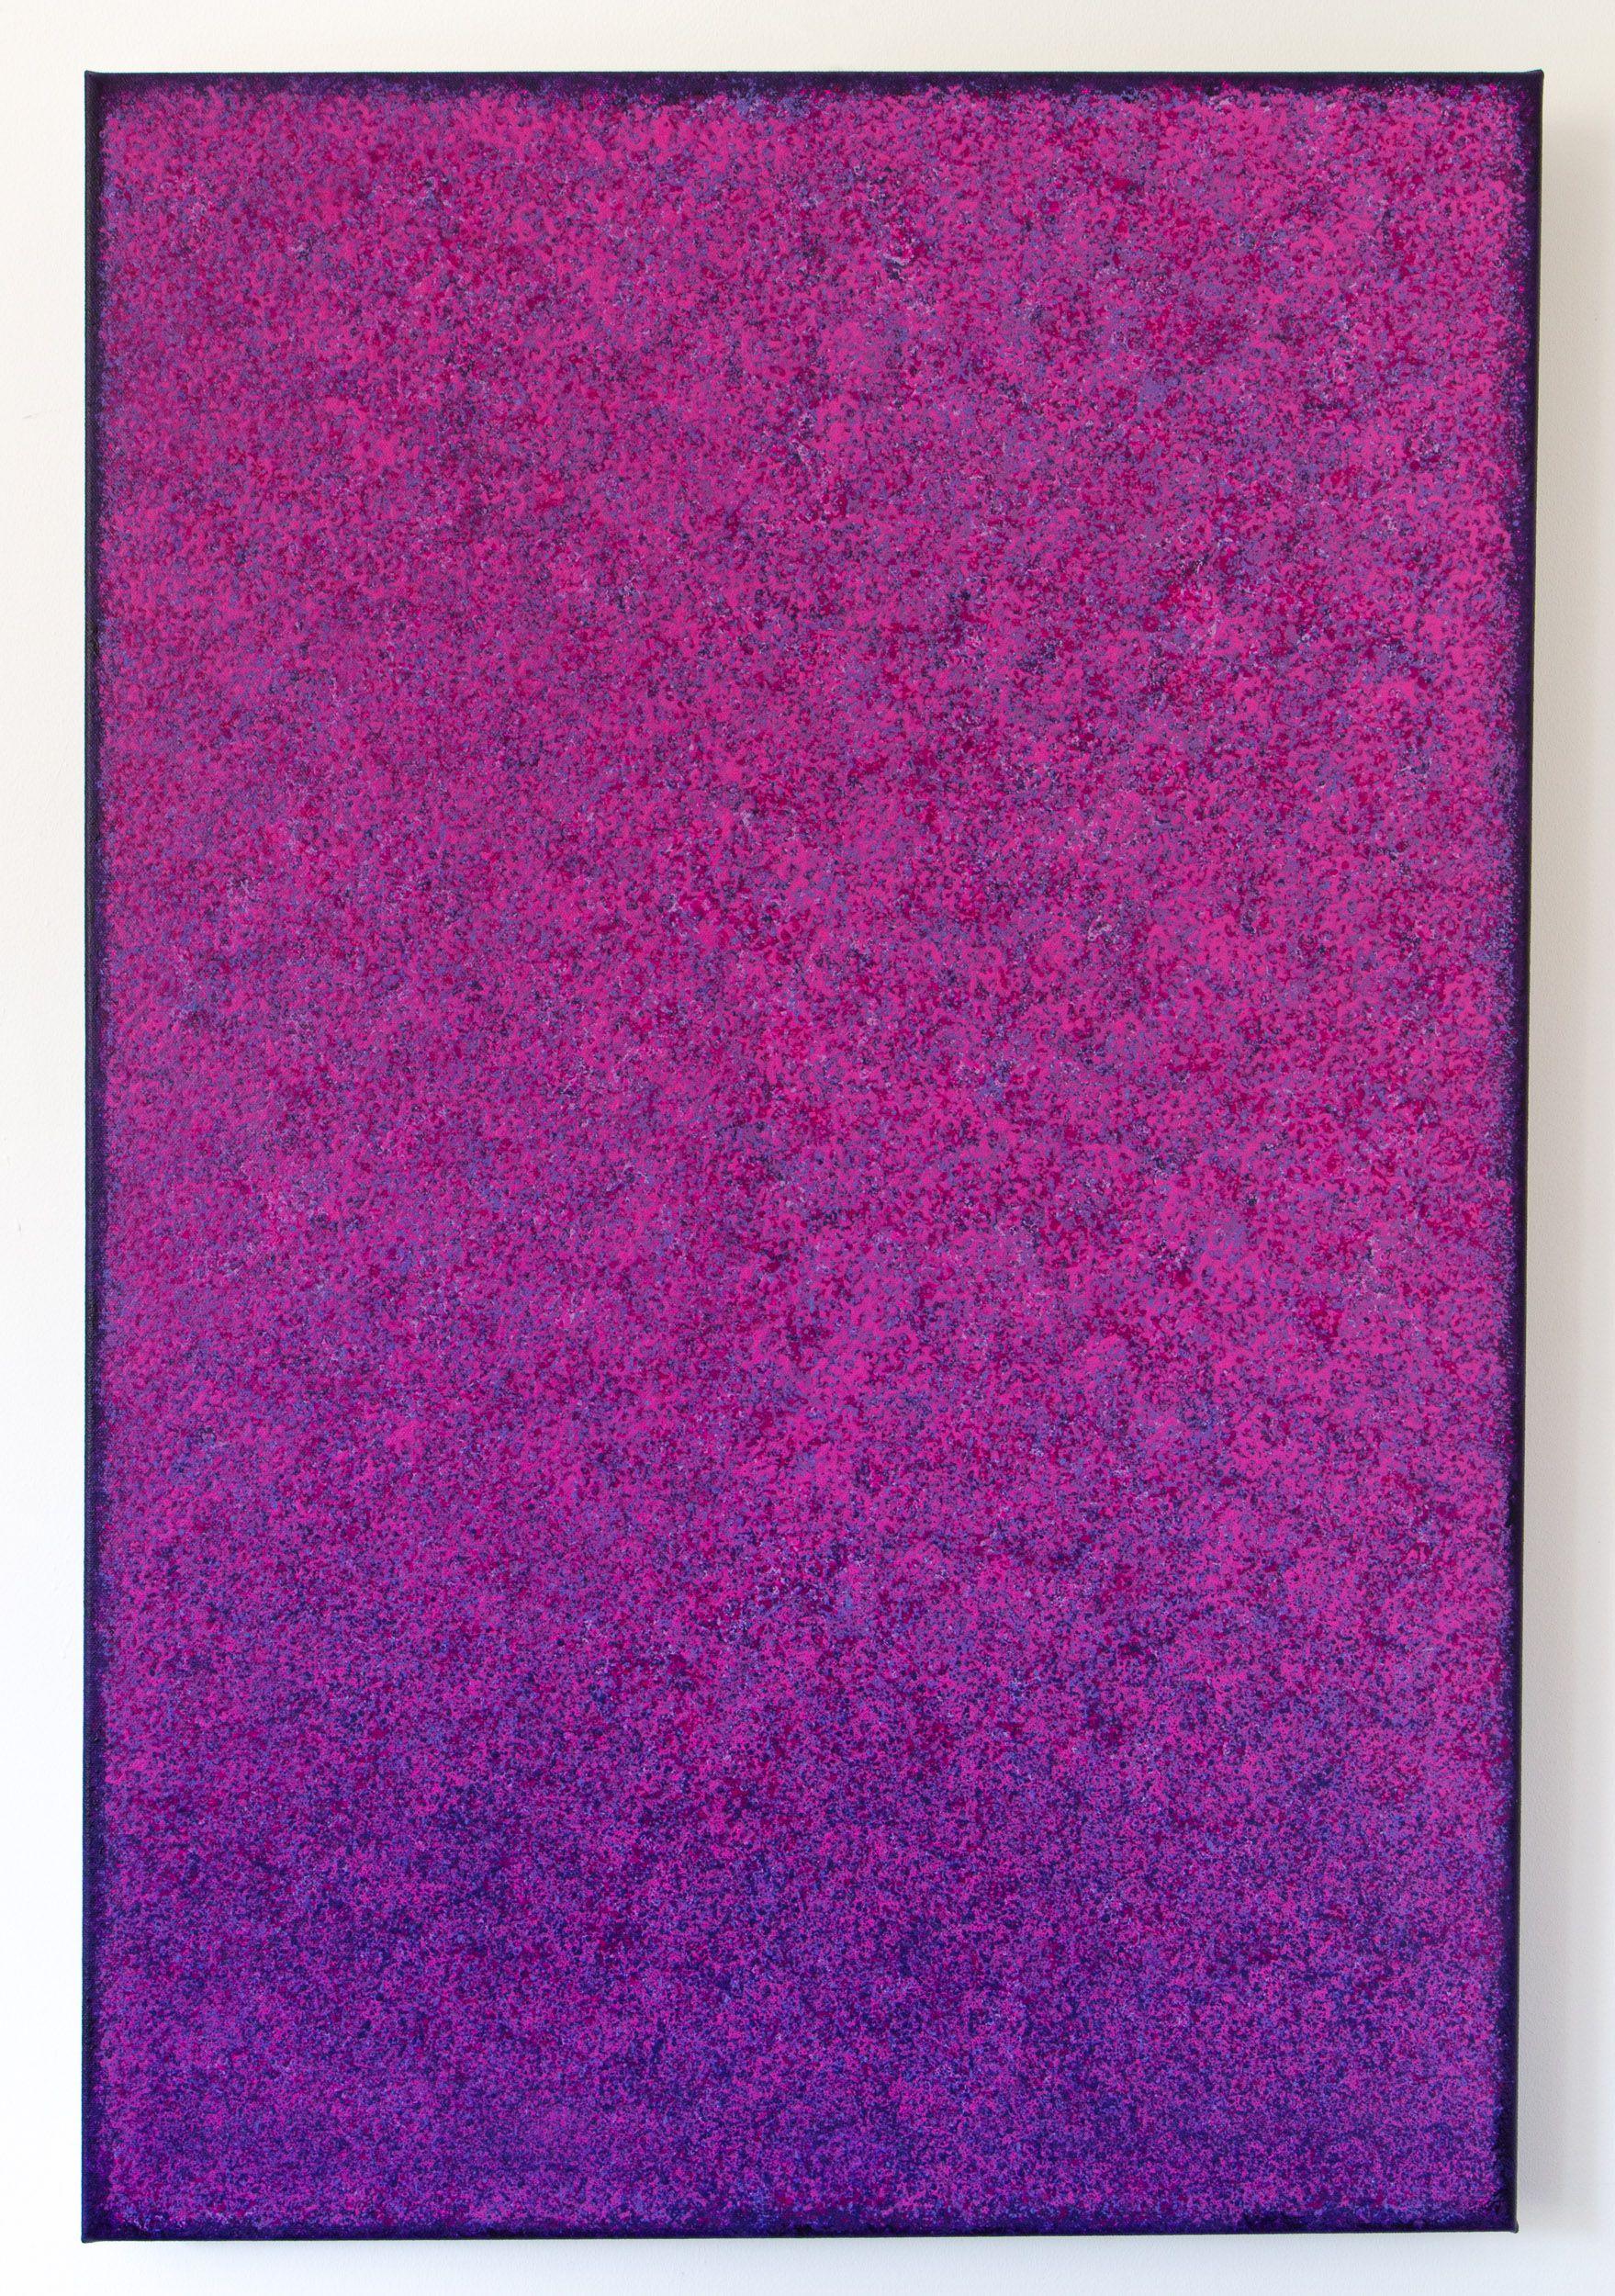 This abstract artwork is a vibrant work with endless texture and speckles across the canvas in different shades and hues of deep magenta and deep violet Made on multiple layers which allow the under painted ones to show through with different